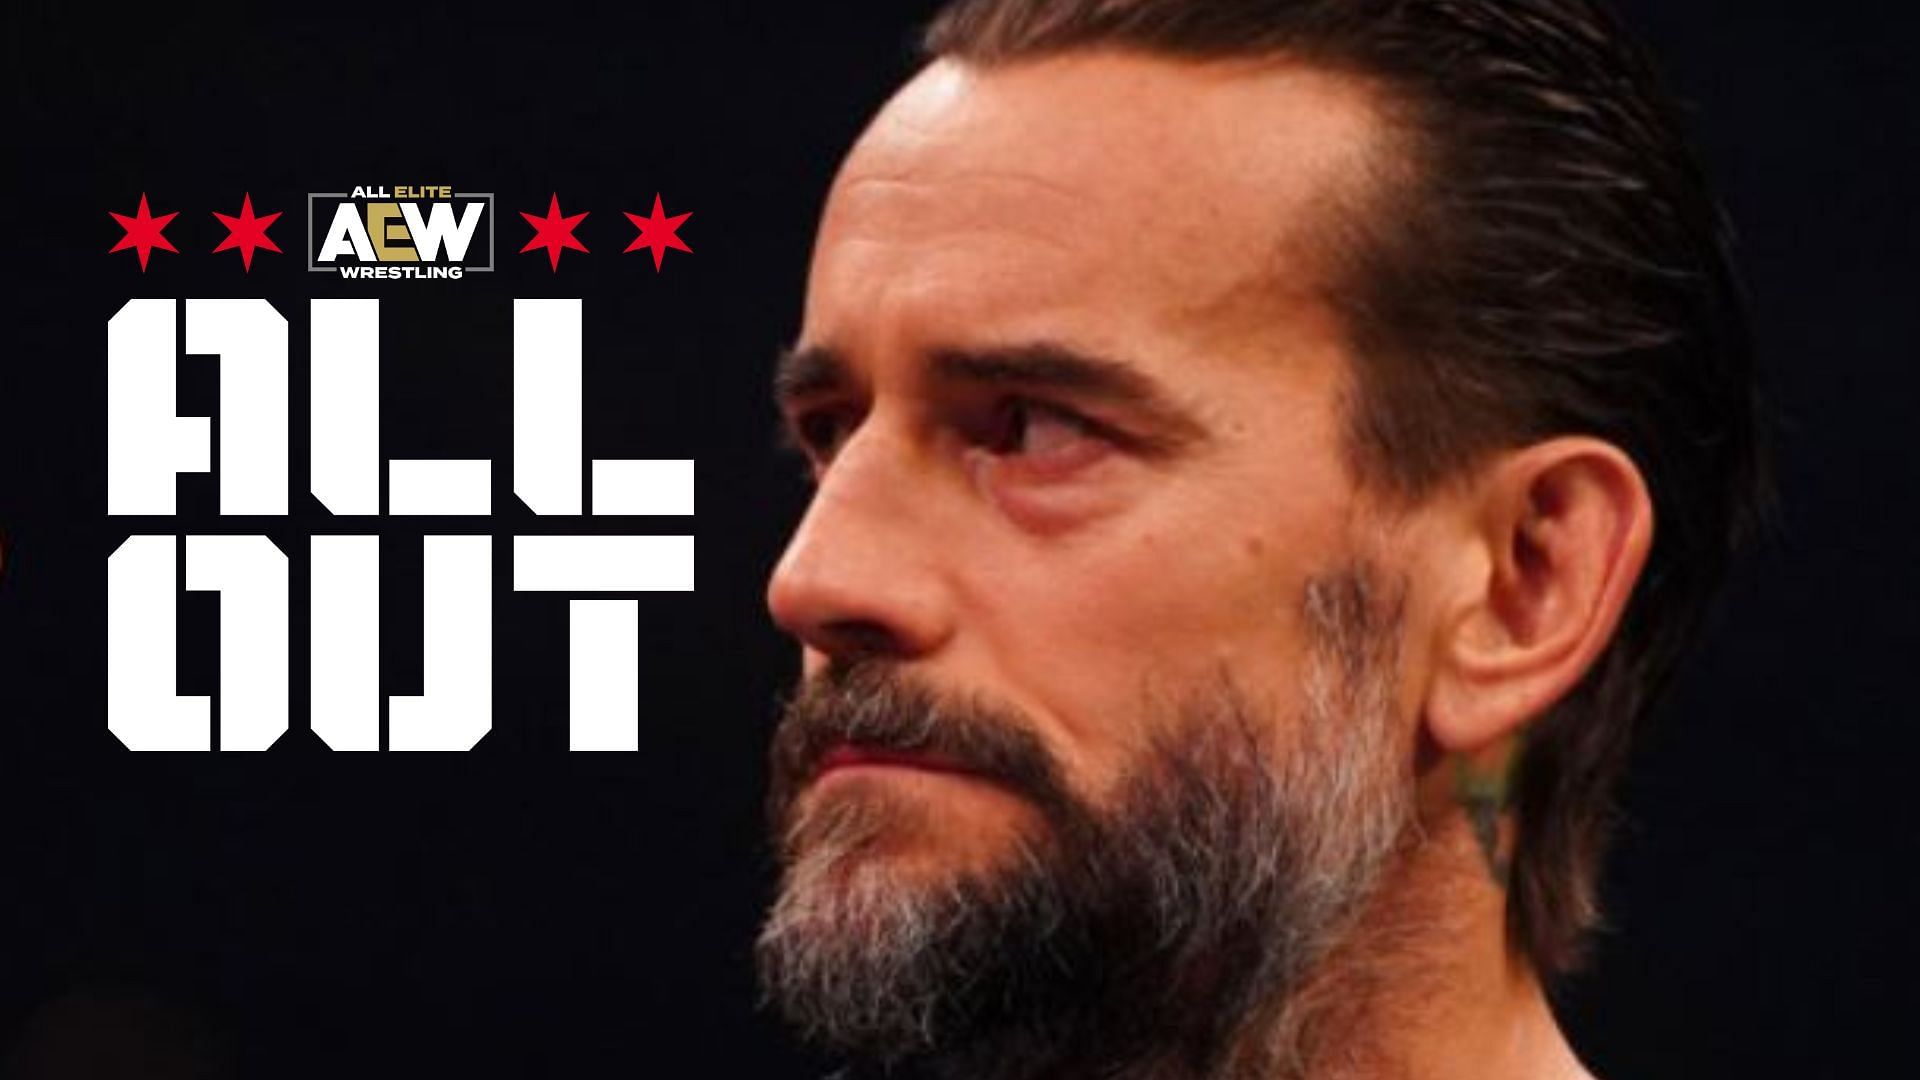 There has been an update on CM Punk